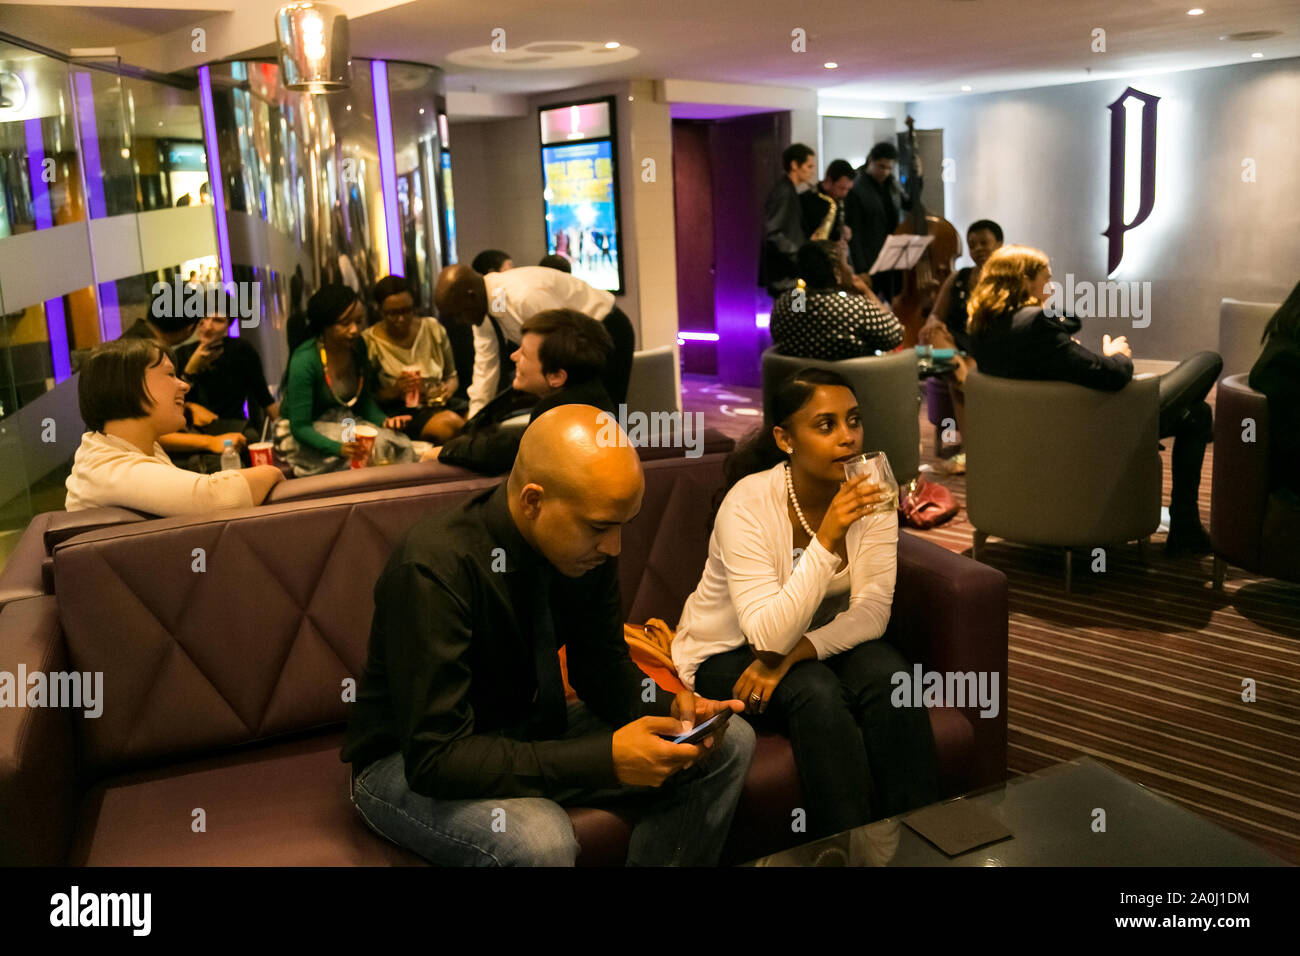 Download Johannesburg South Africa December 10 2014 Young People Drinking Whiskey Out Of A Tumbler Glass In A Cigar Lounge Stock Photo Alamy Yellowimages Mockups